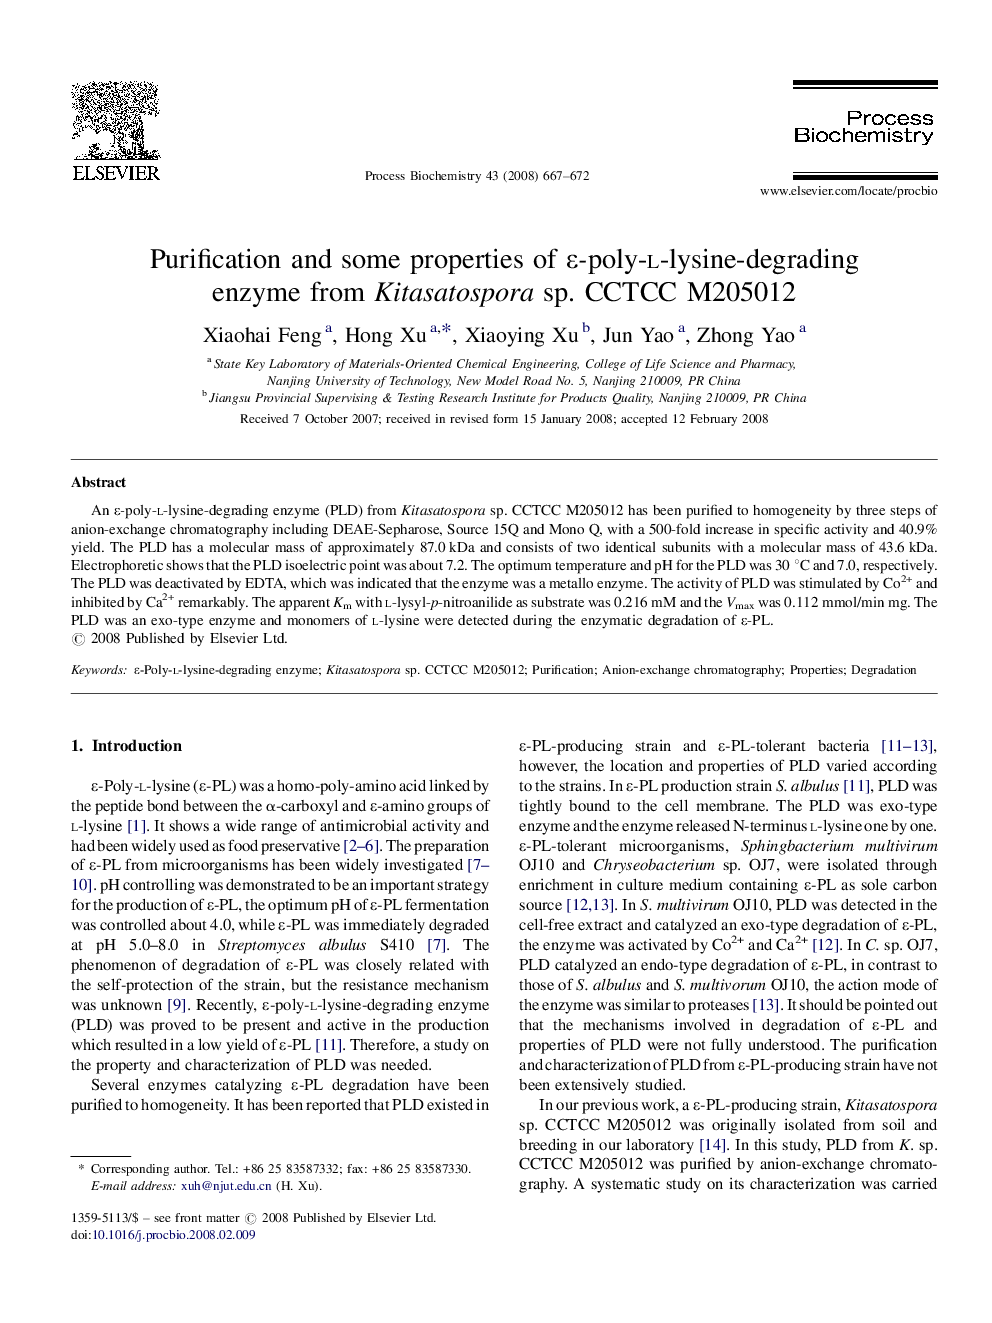 Purification and some properties of ɛ-poly-l-lysine-degrading enzyme from Kitasatospora sp. CCTCC M205012